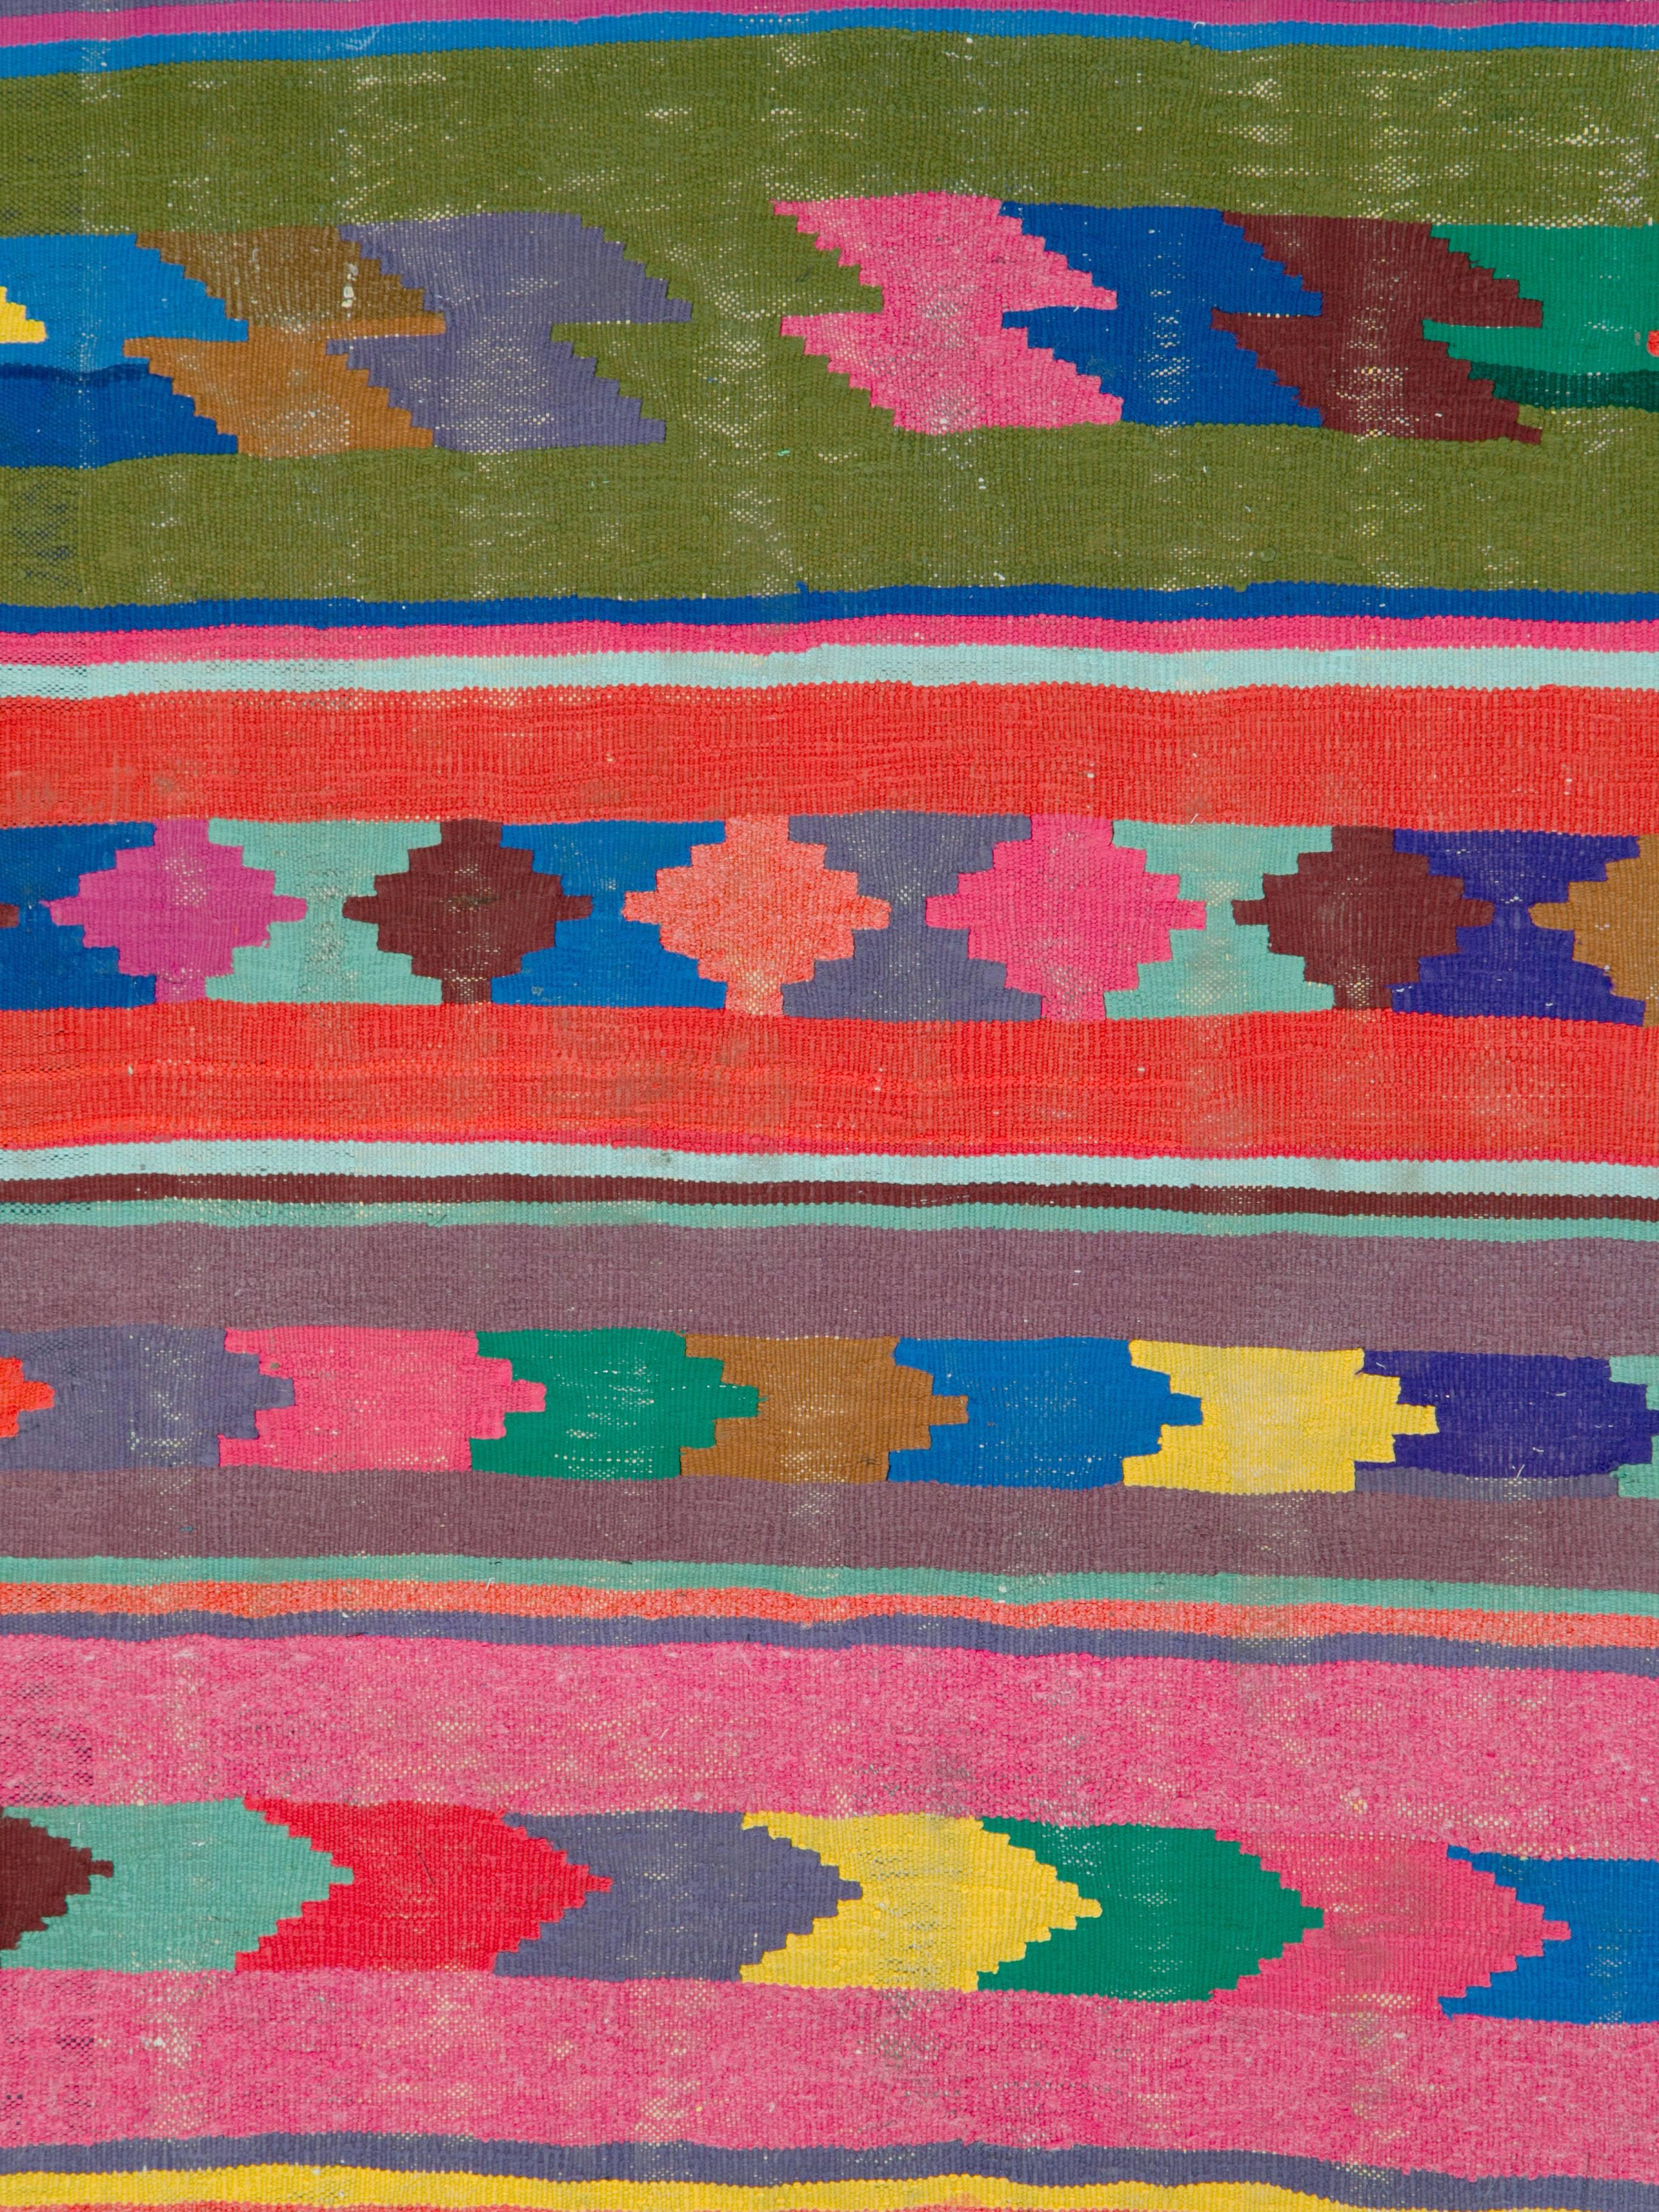 A Persian flat-woven Kilim rug from the late 20th century.